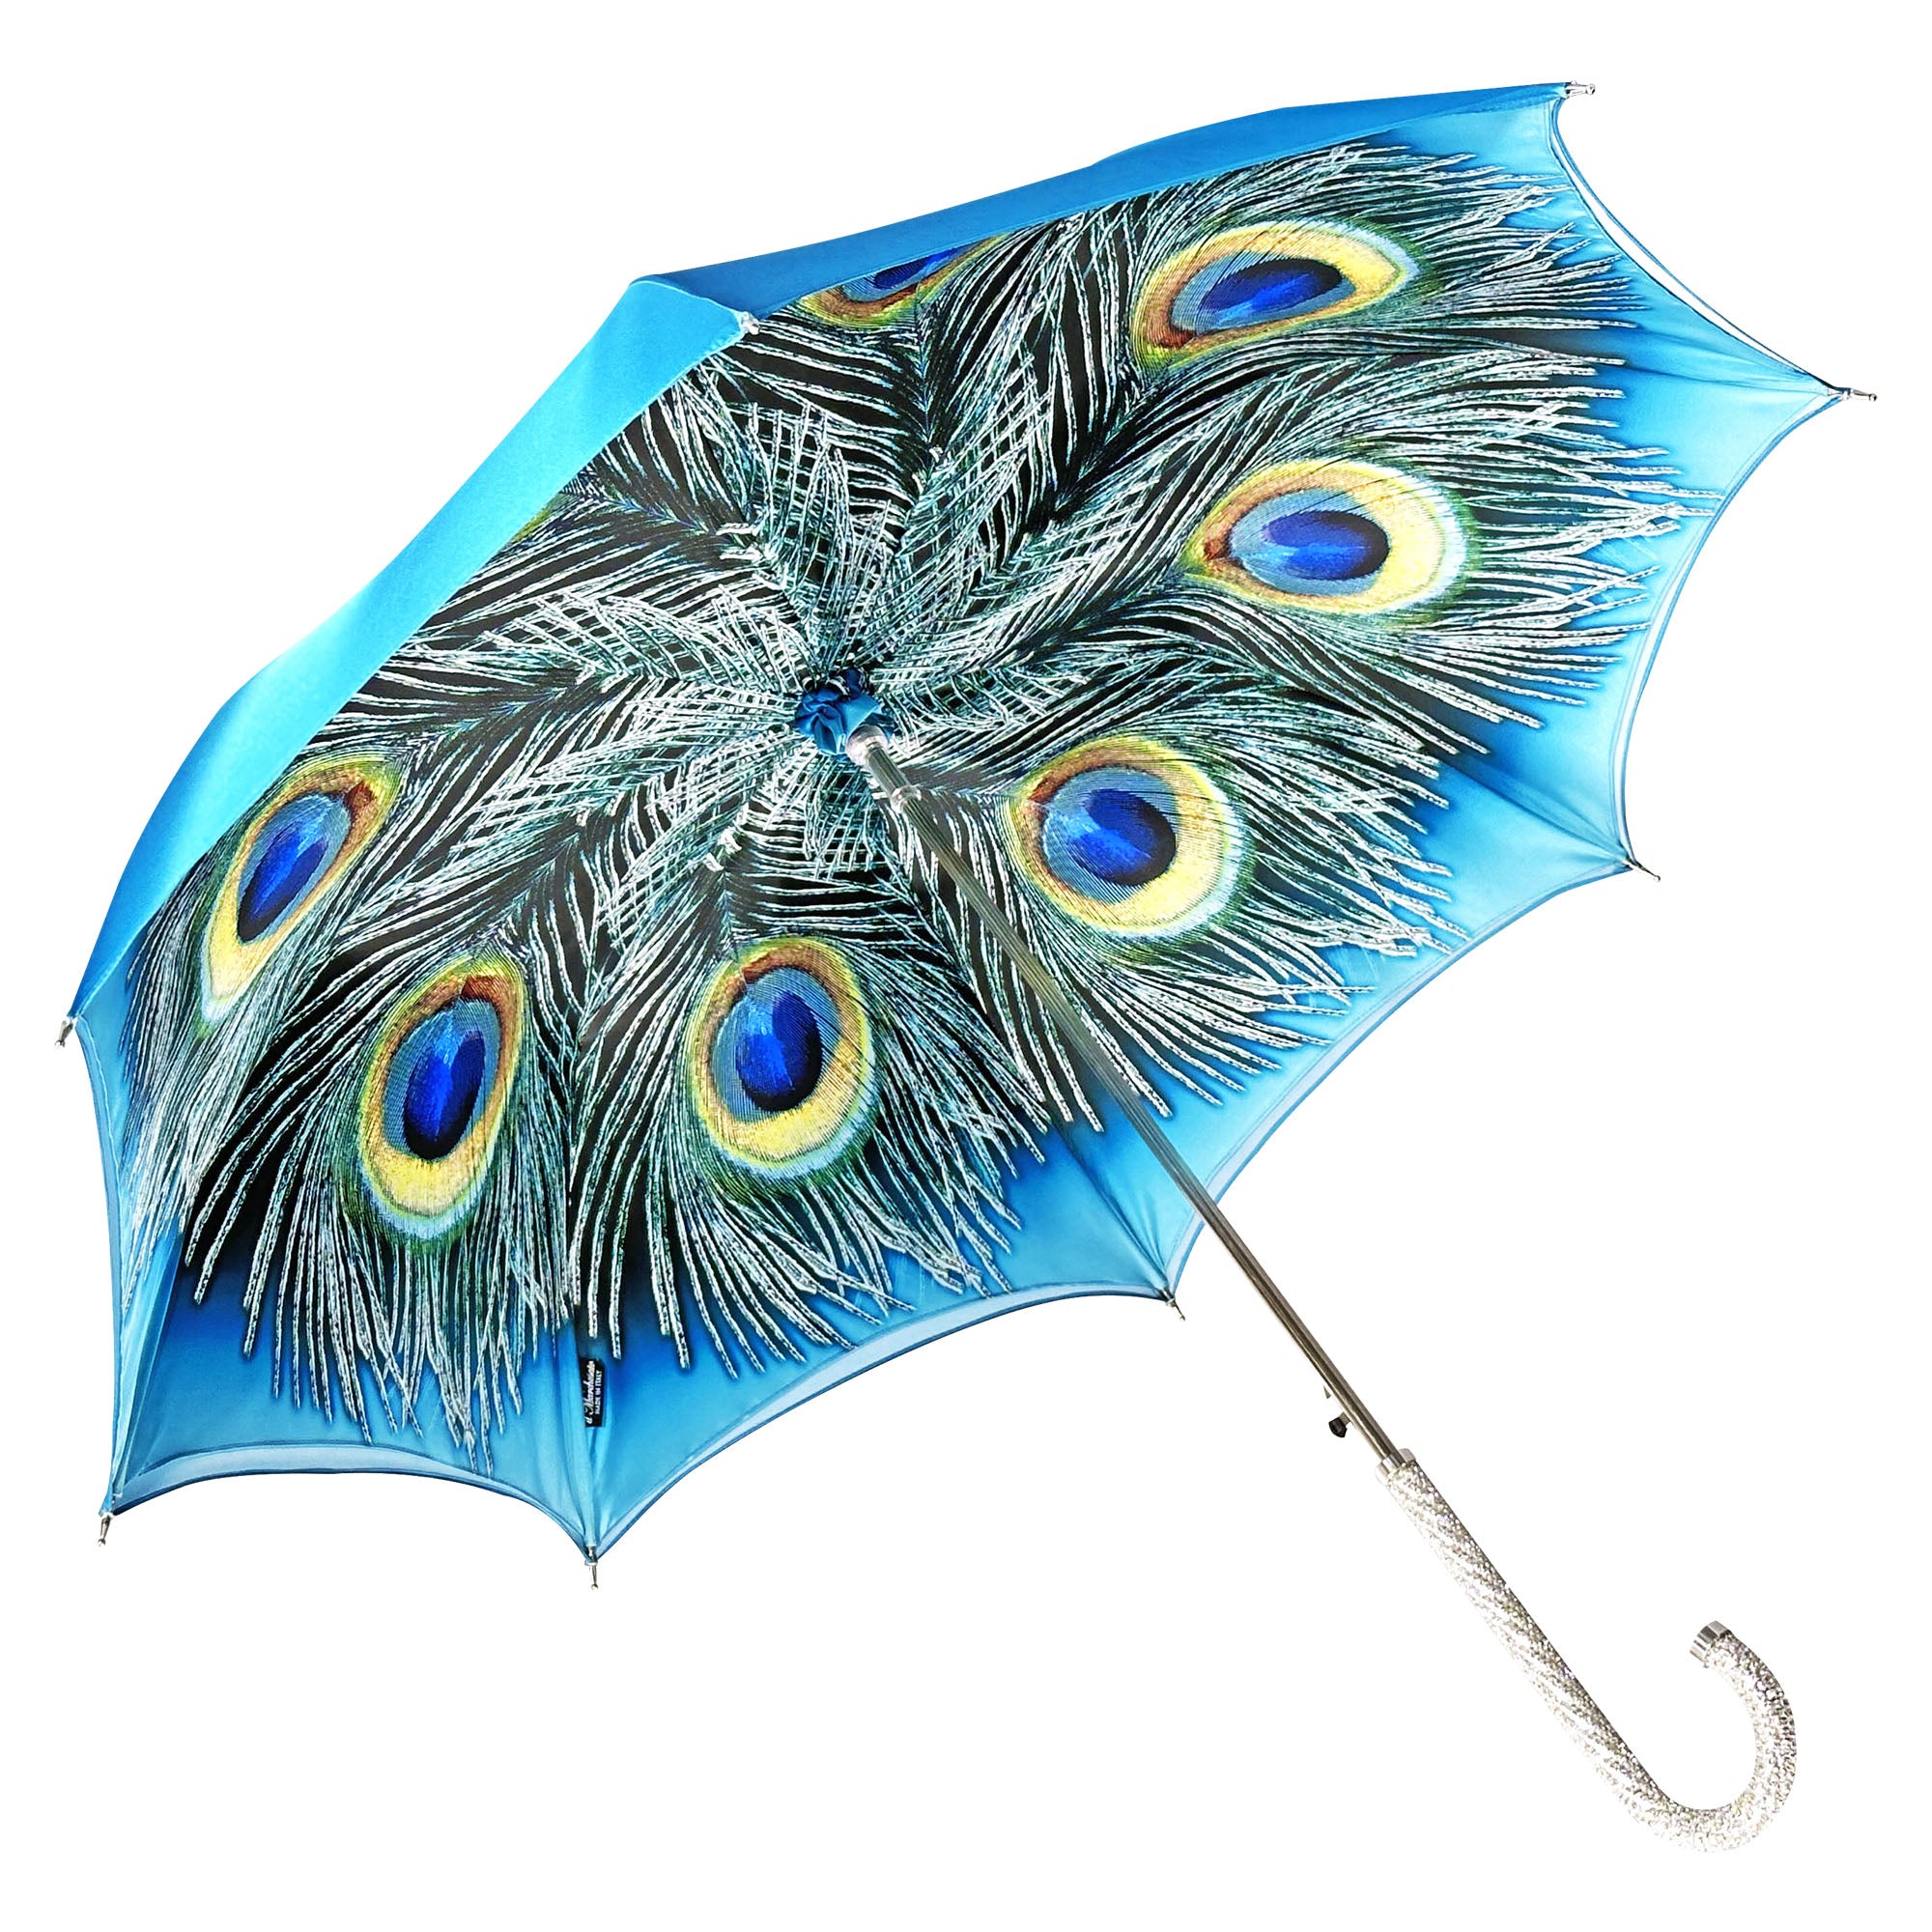 Umbrella with fantastic turquoise peacock thousands of crystals